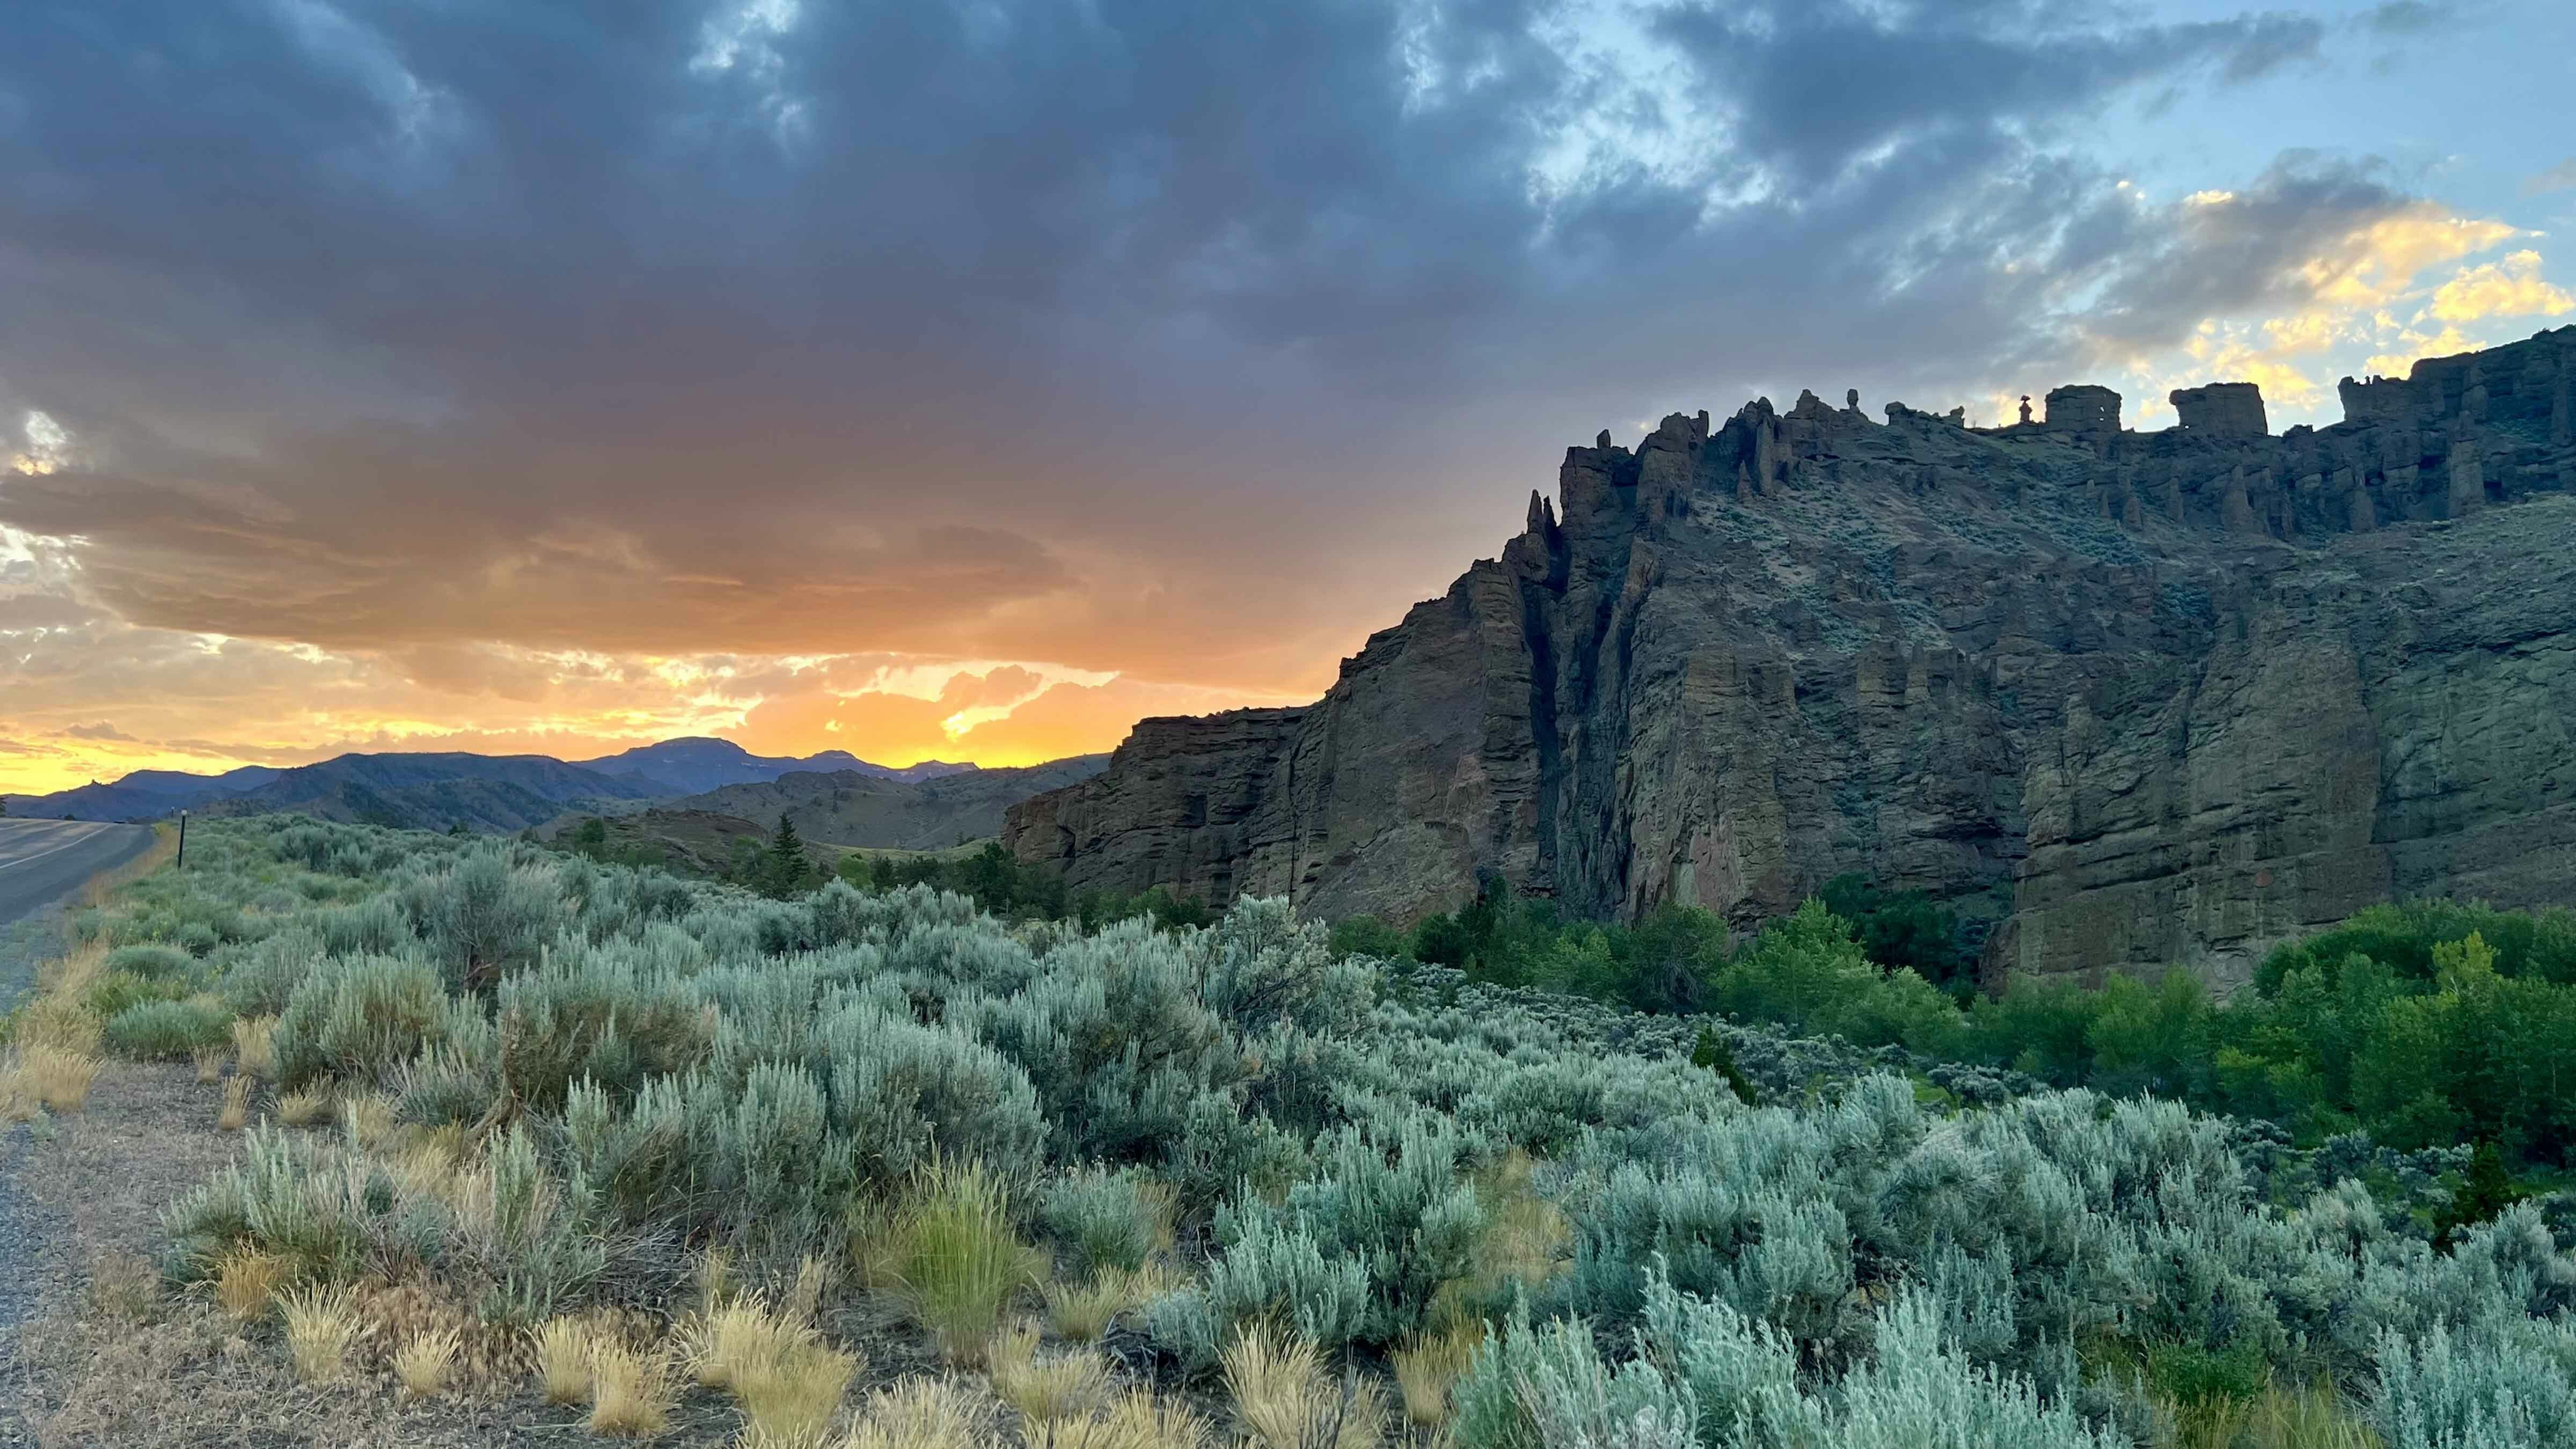 "Sunset at Holy City, Shoshone National Forest. The low evening light always gives a spectacular show on the North Fork of the Shoshone!"